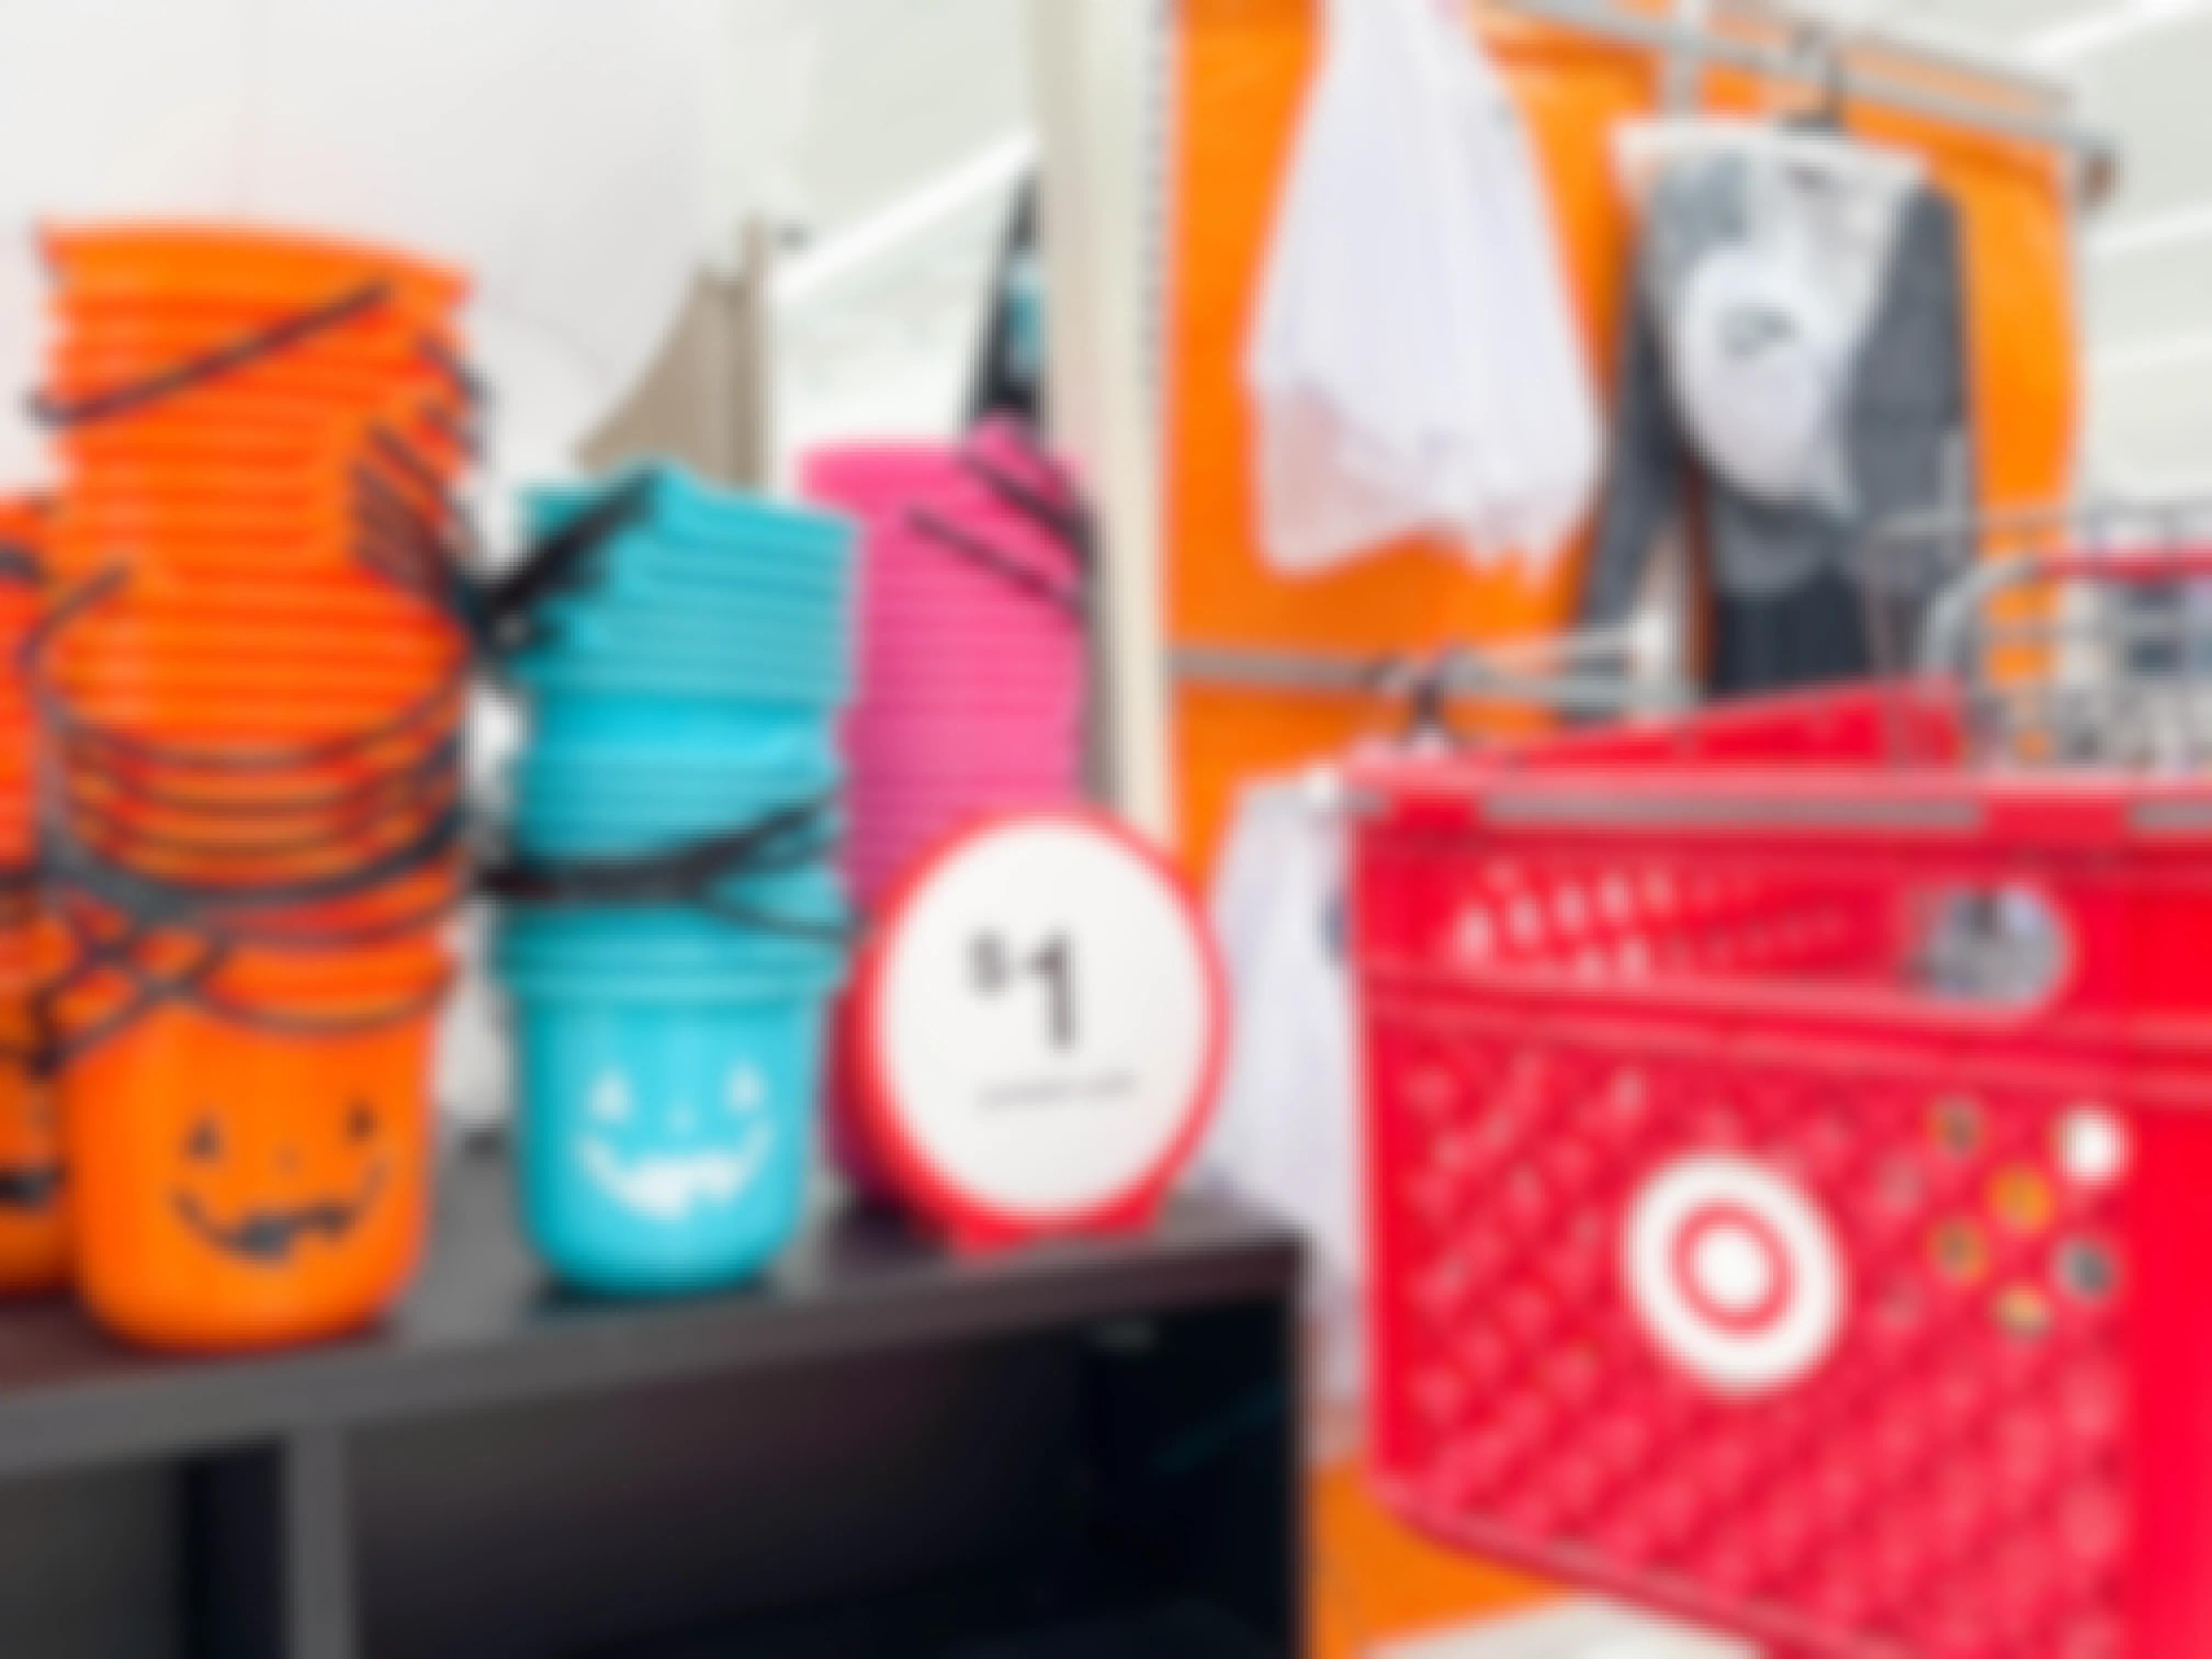 a target shopping cart parked next to a display shelf with orange, blue and pink halloween pails next to a sign that says $1